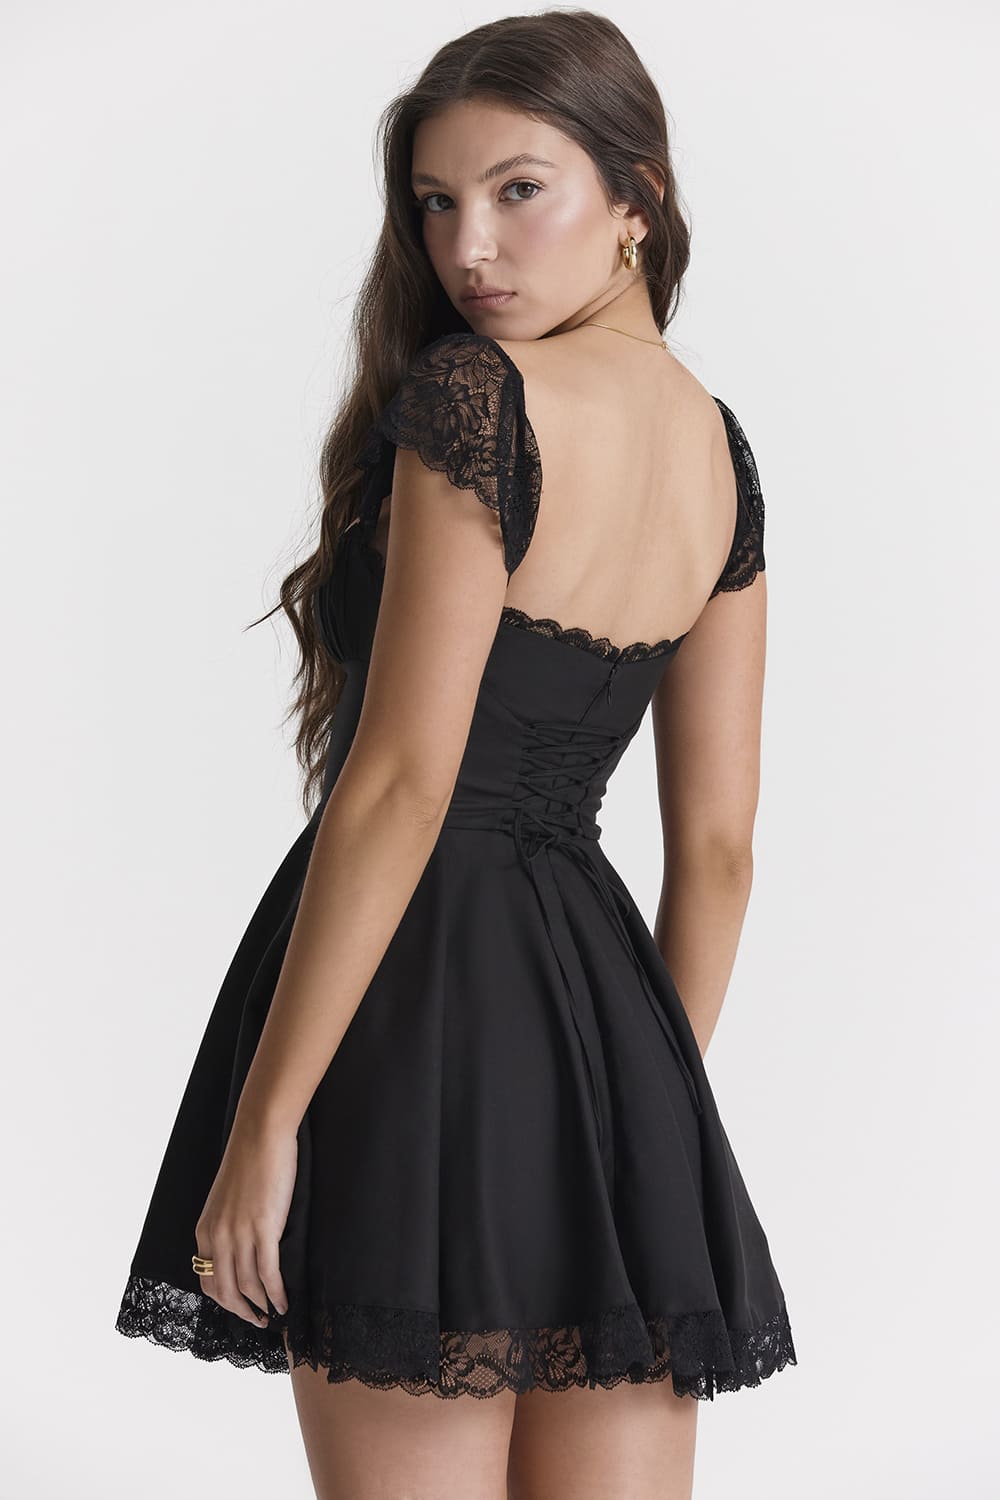 Sleek and Chic: The Ultimate Black A-Line Mini Dress